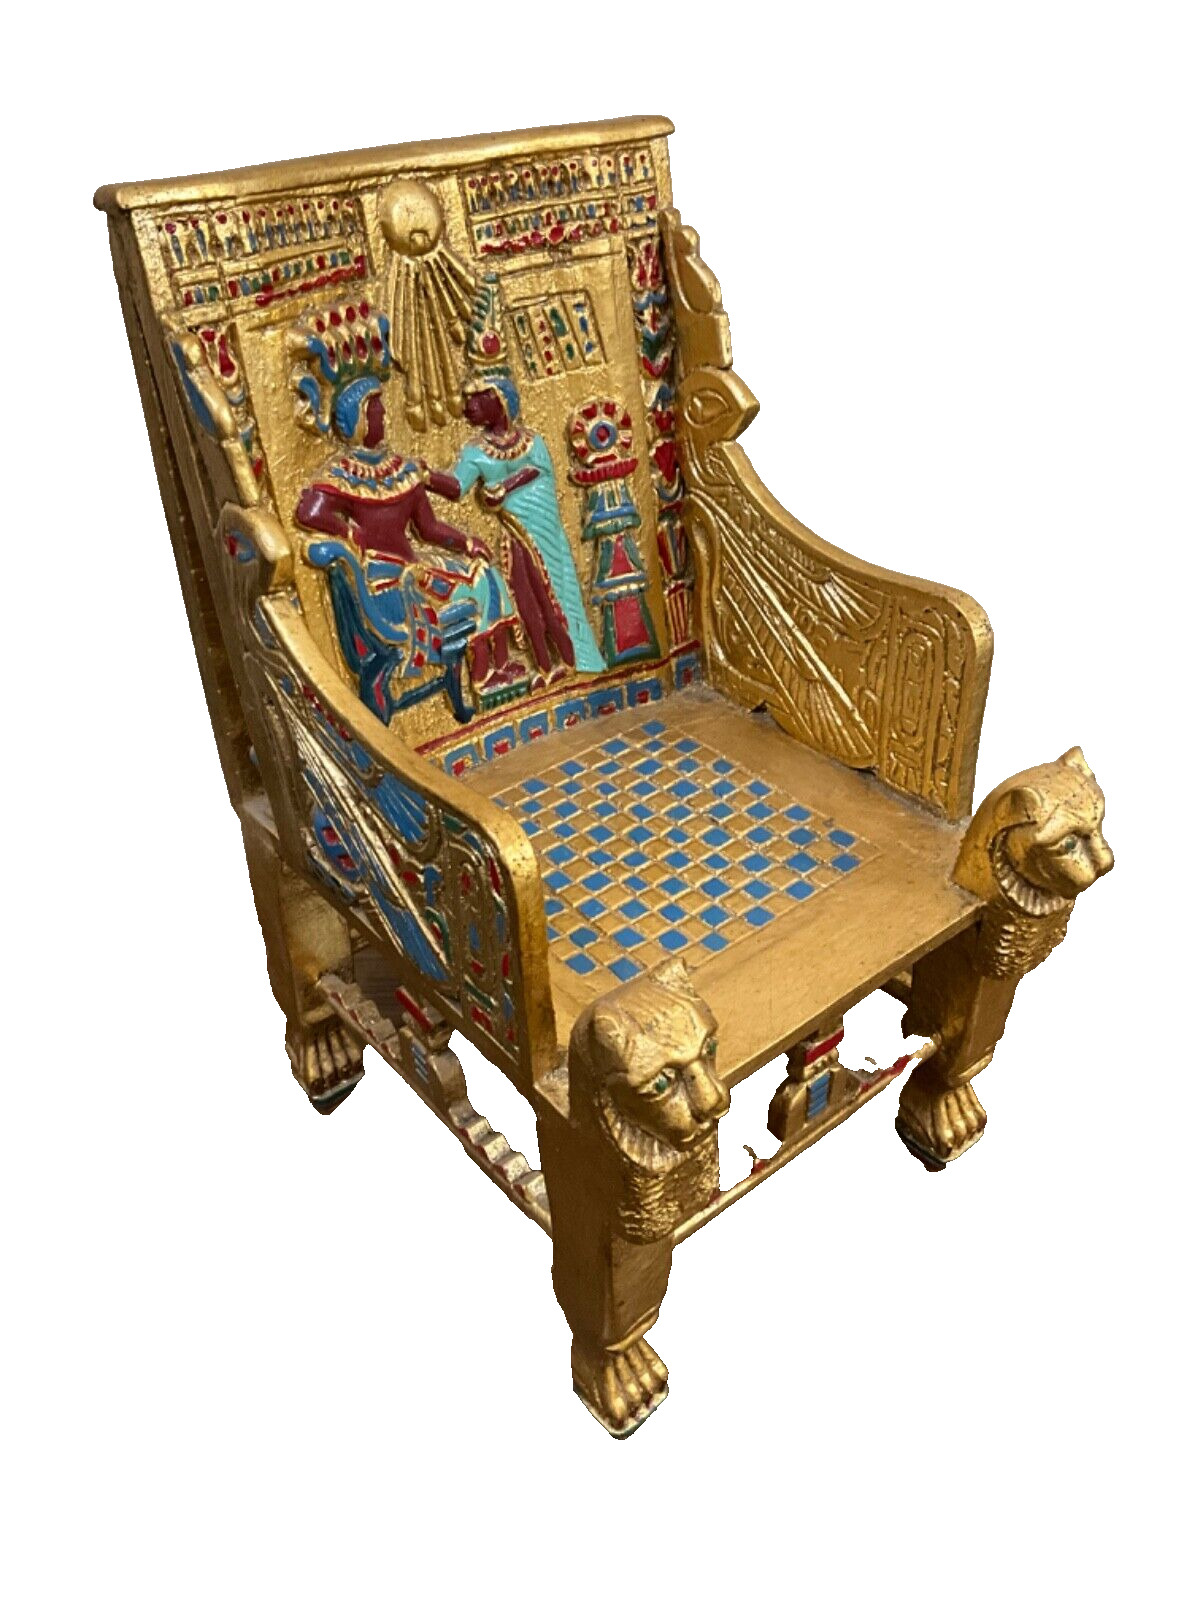 Handmade, Antique Carving Wooden Chair, King TUT ANKH AMON, Pharaonic Wood Chair